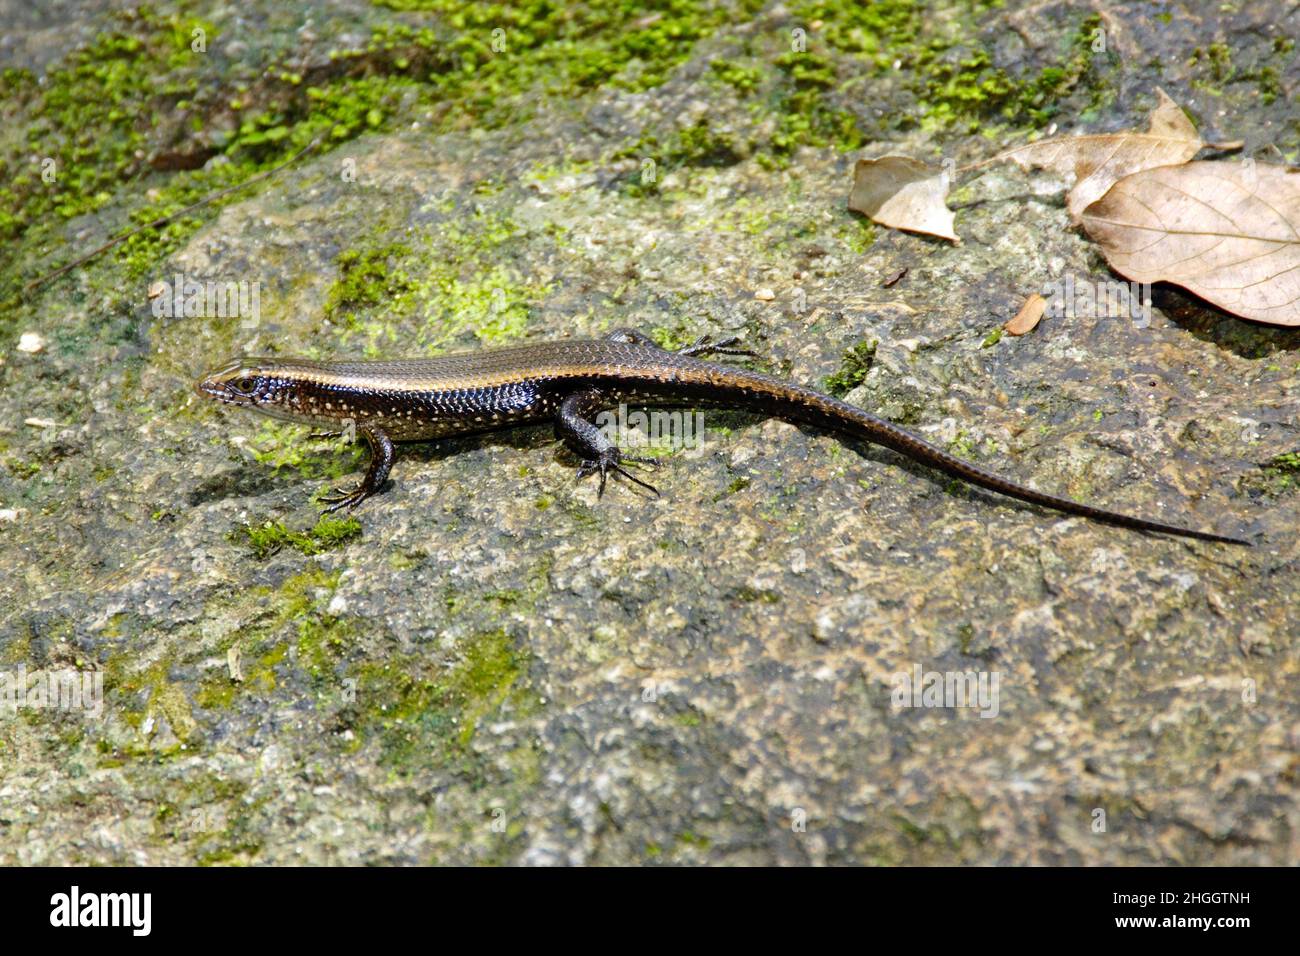 East Indian brown mabuya, Many-lined sun skink, Many-striped skink, Sun skink, Golden skink (Mabuya multifasciata, Eutropis multifasciata), stands on Stock Photo